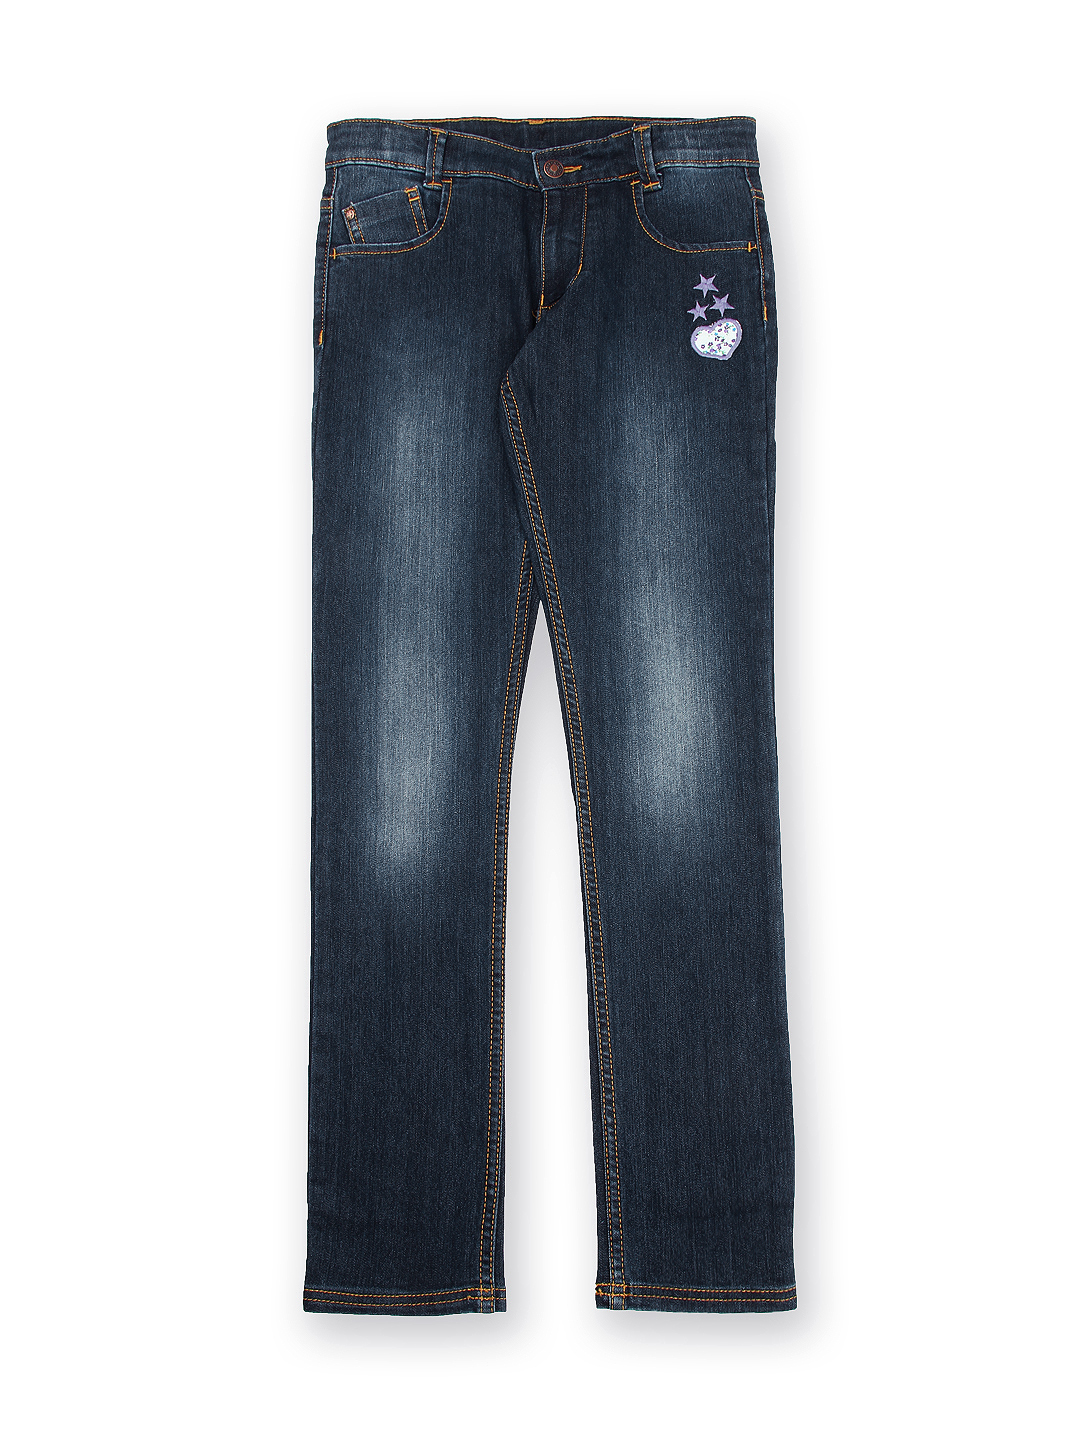 United Colors of Benetton Girls Blue Skinny Fit Jeans Rs 1699 Rs 849